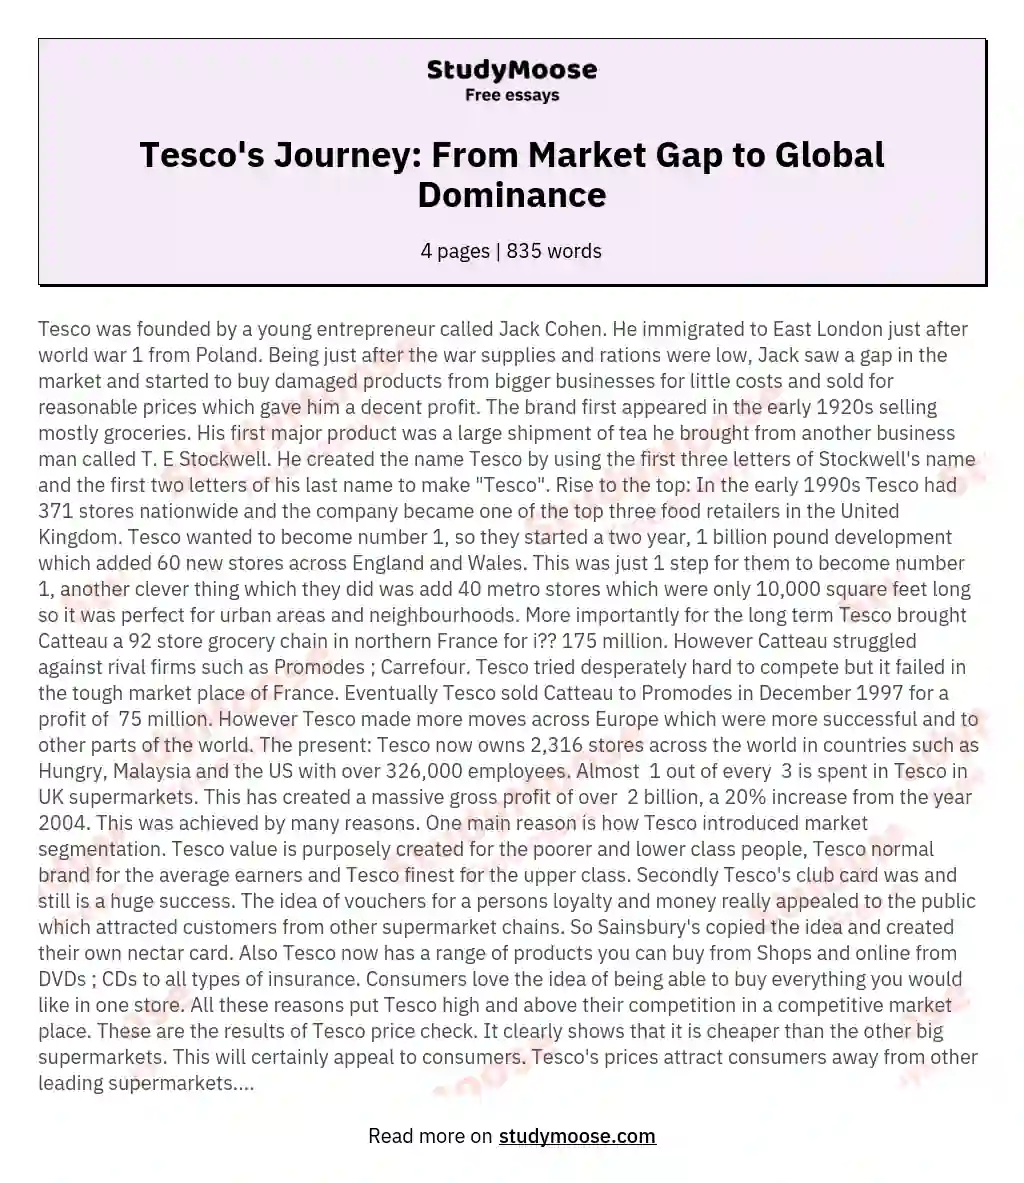 Tesco's Journey: From Market Gap to Global Dominance essay